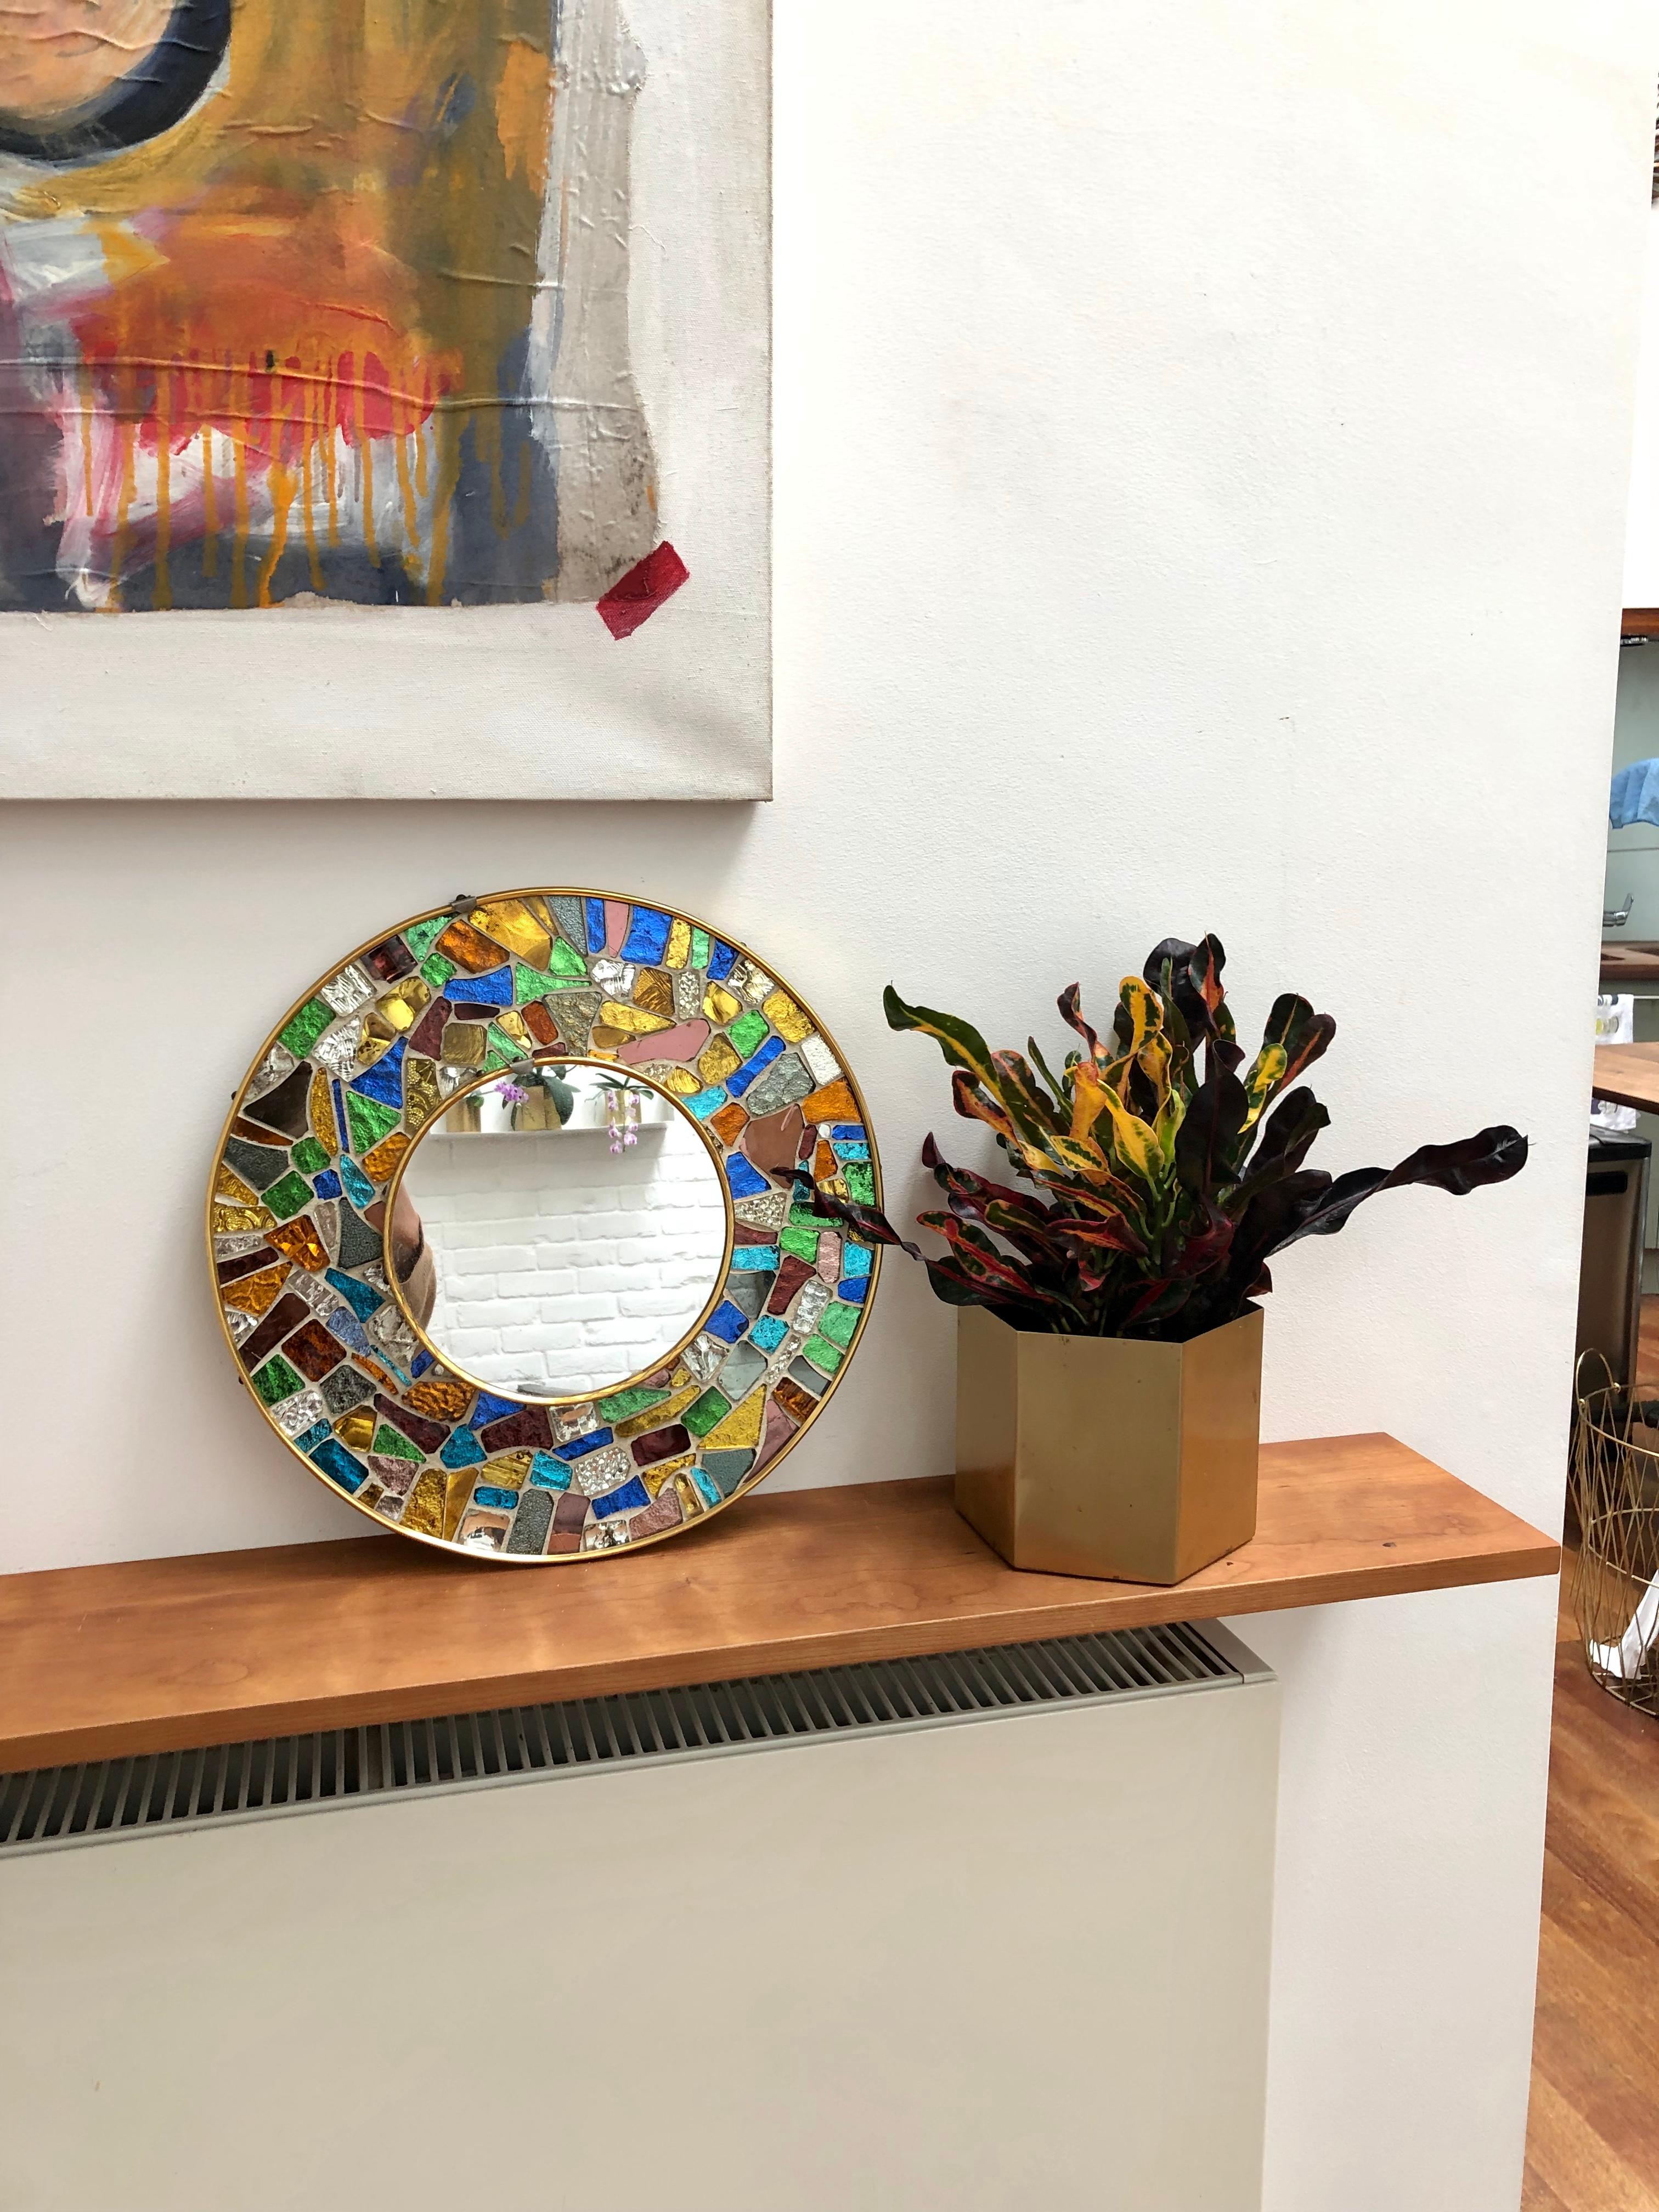 Vibrant midcentury circular decorative brass mirror with colourful mosaic surround. Made in the style of Antoni Gaudí's 'Trencadís' technique involving irregularly-shaped handcut-glass tiles in different colours. Spanish origin, circa 1960s. Short